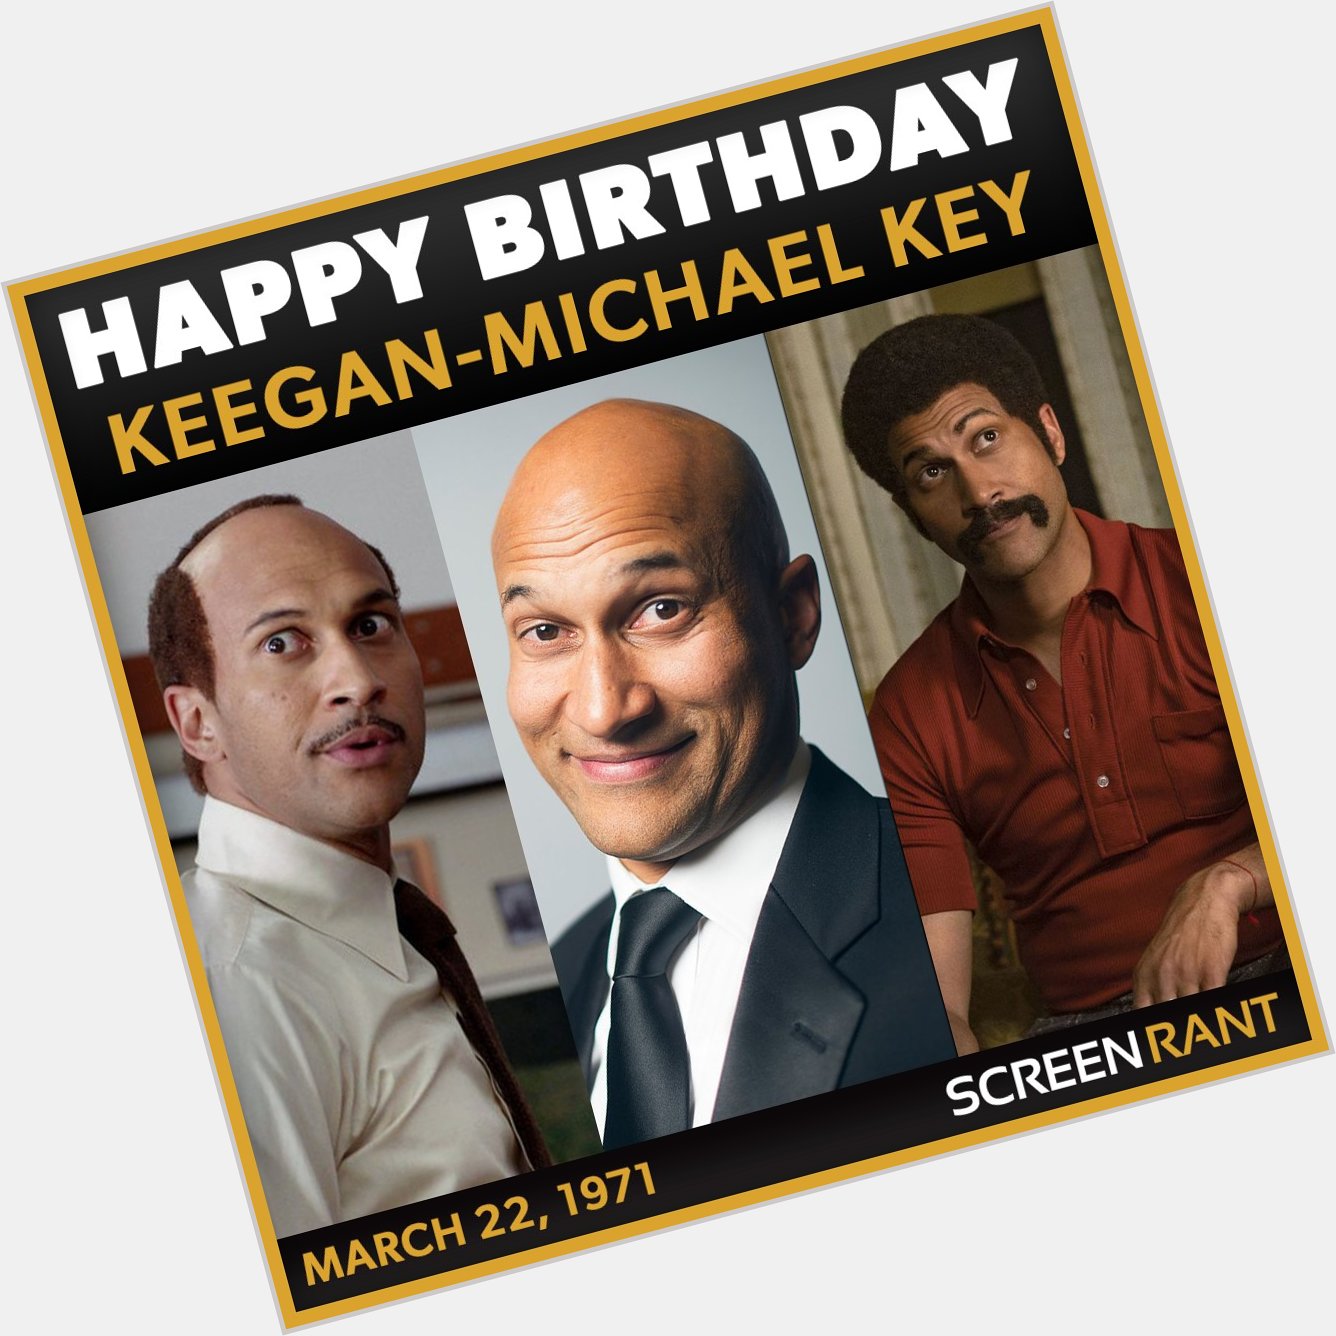 Happy Birthday to the very funny What are some of your favorite Keegan-Michael Key roles and sketches? 